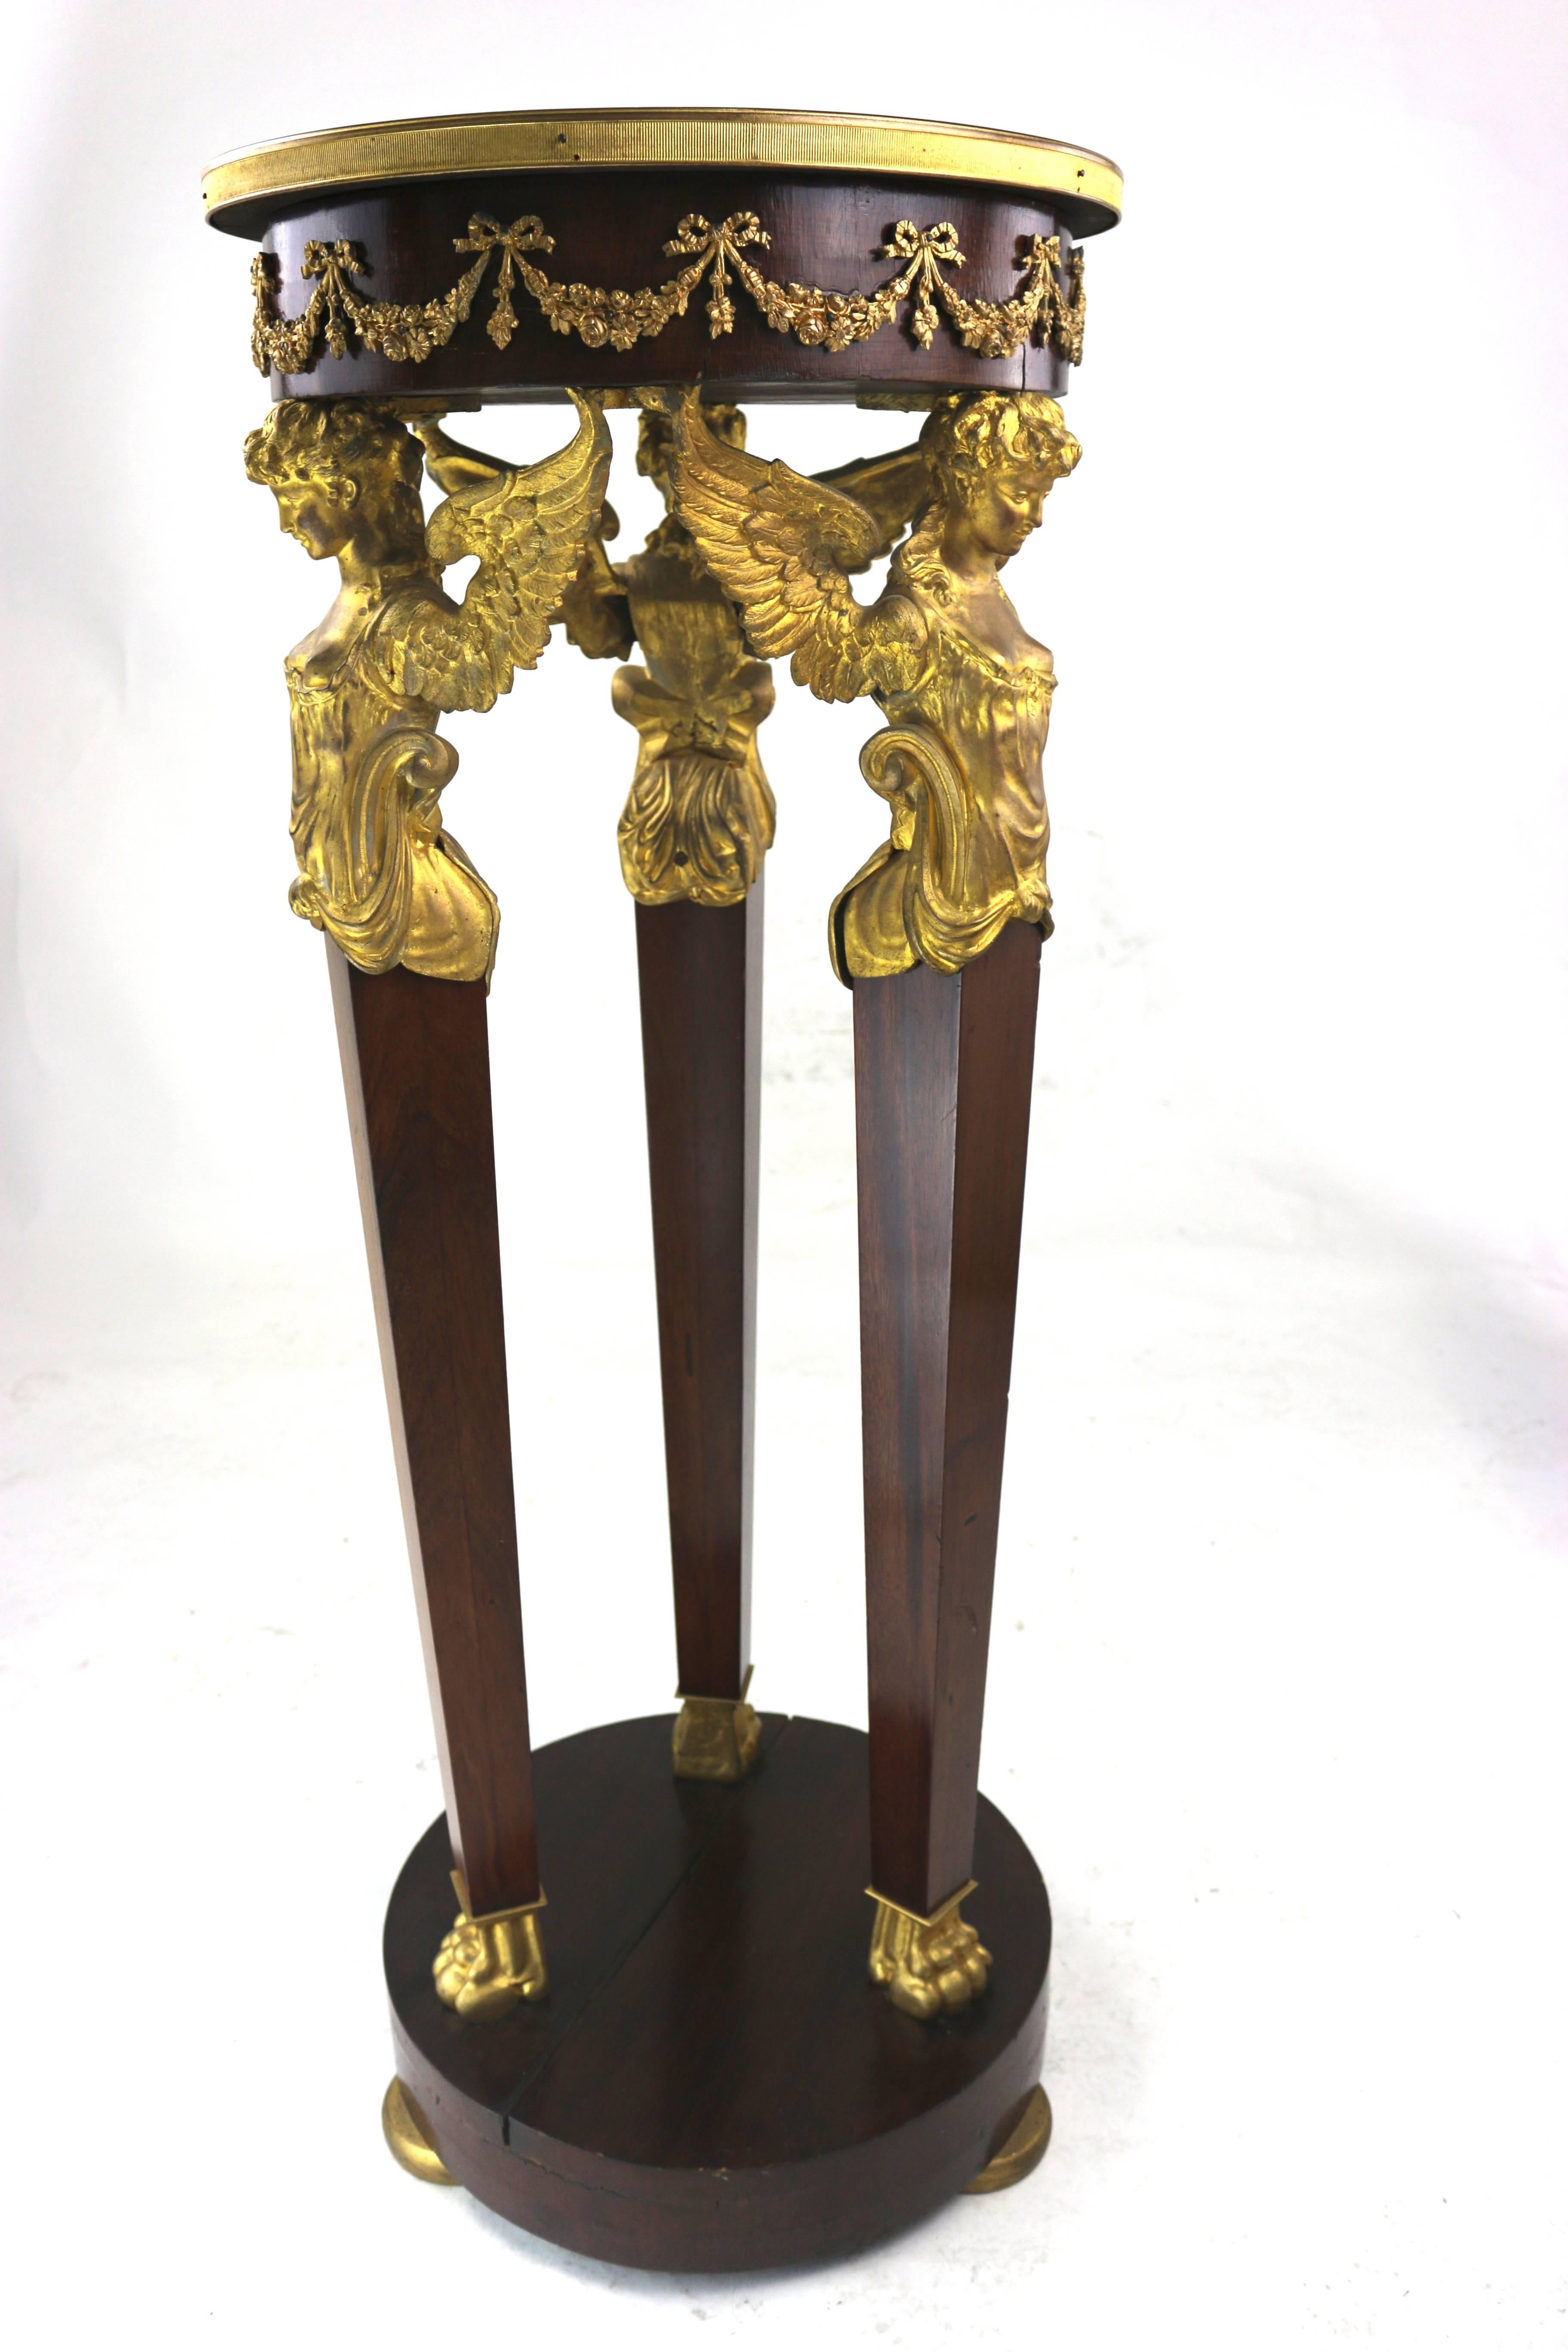 French Empire Period Gilt Mahogany Pedestal, Gilt Winged Caryatids For Sale 4